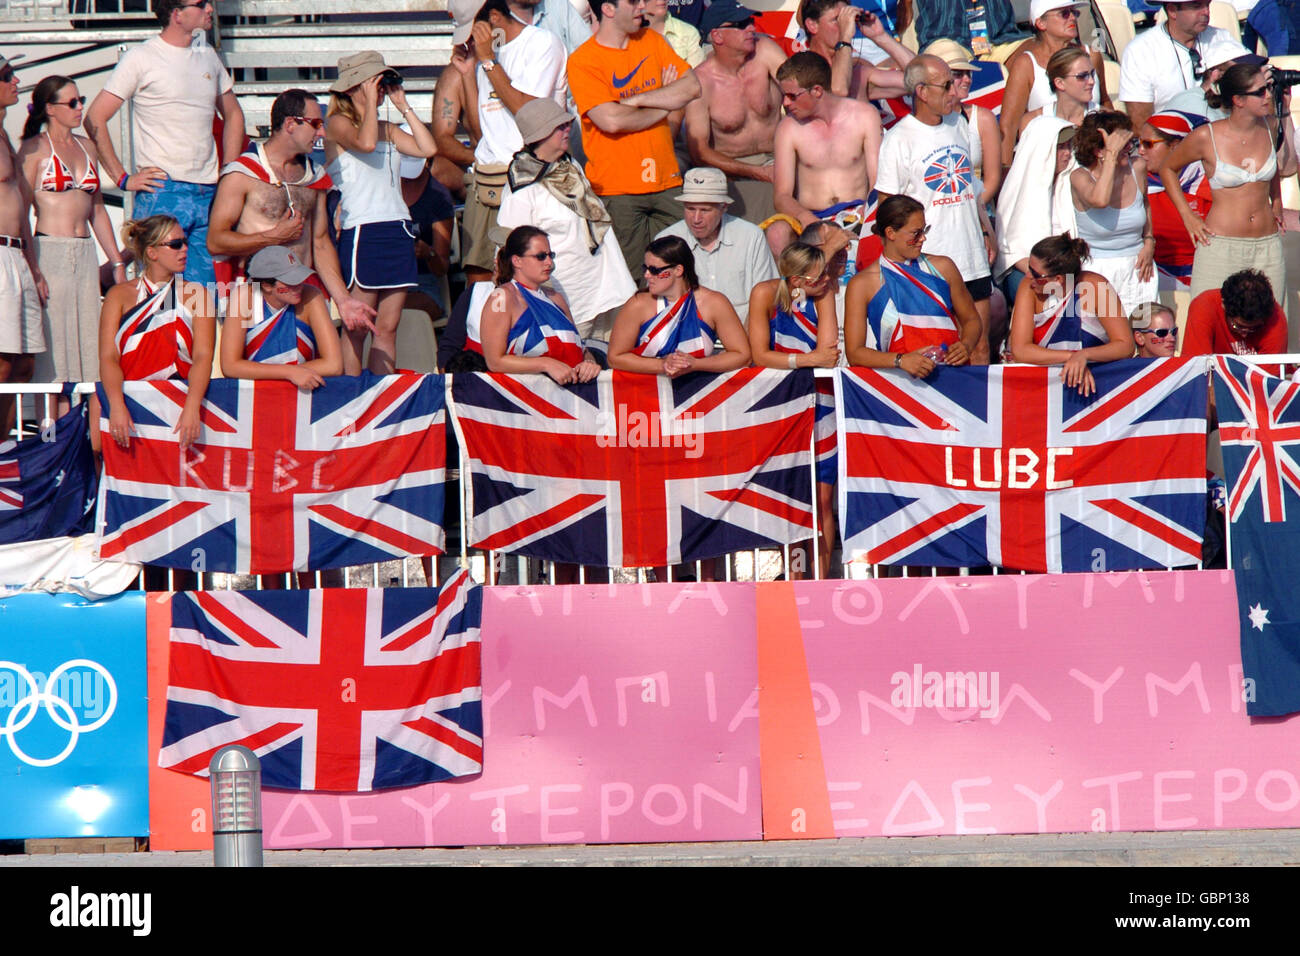 Rowing - Athens Olympic Games 2004. Great Britain fans display their union jacks Stock Photo